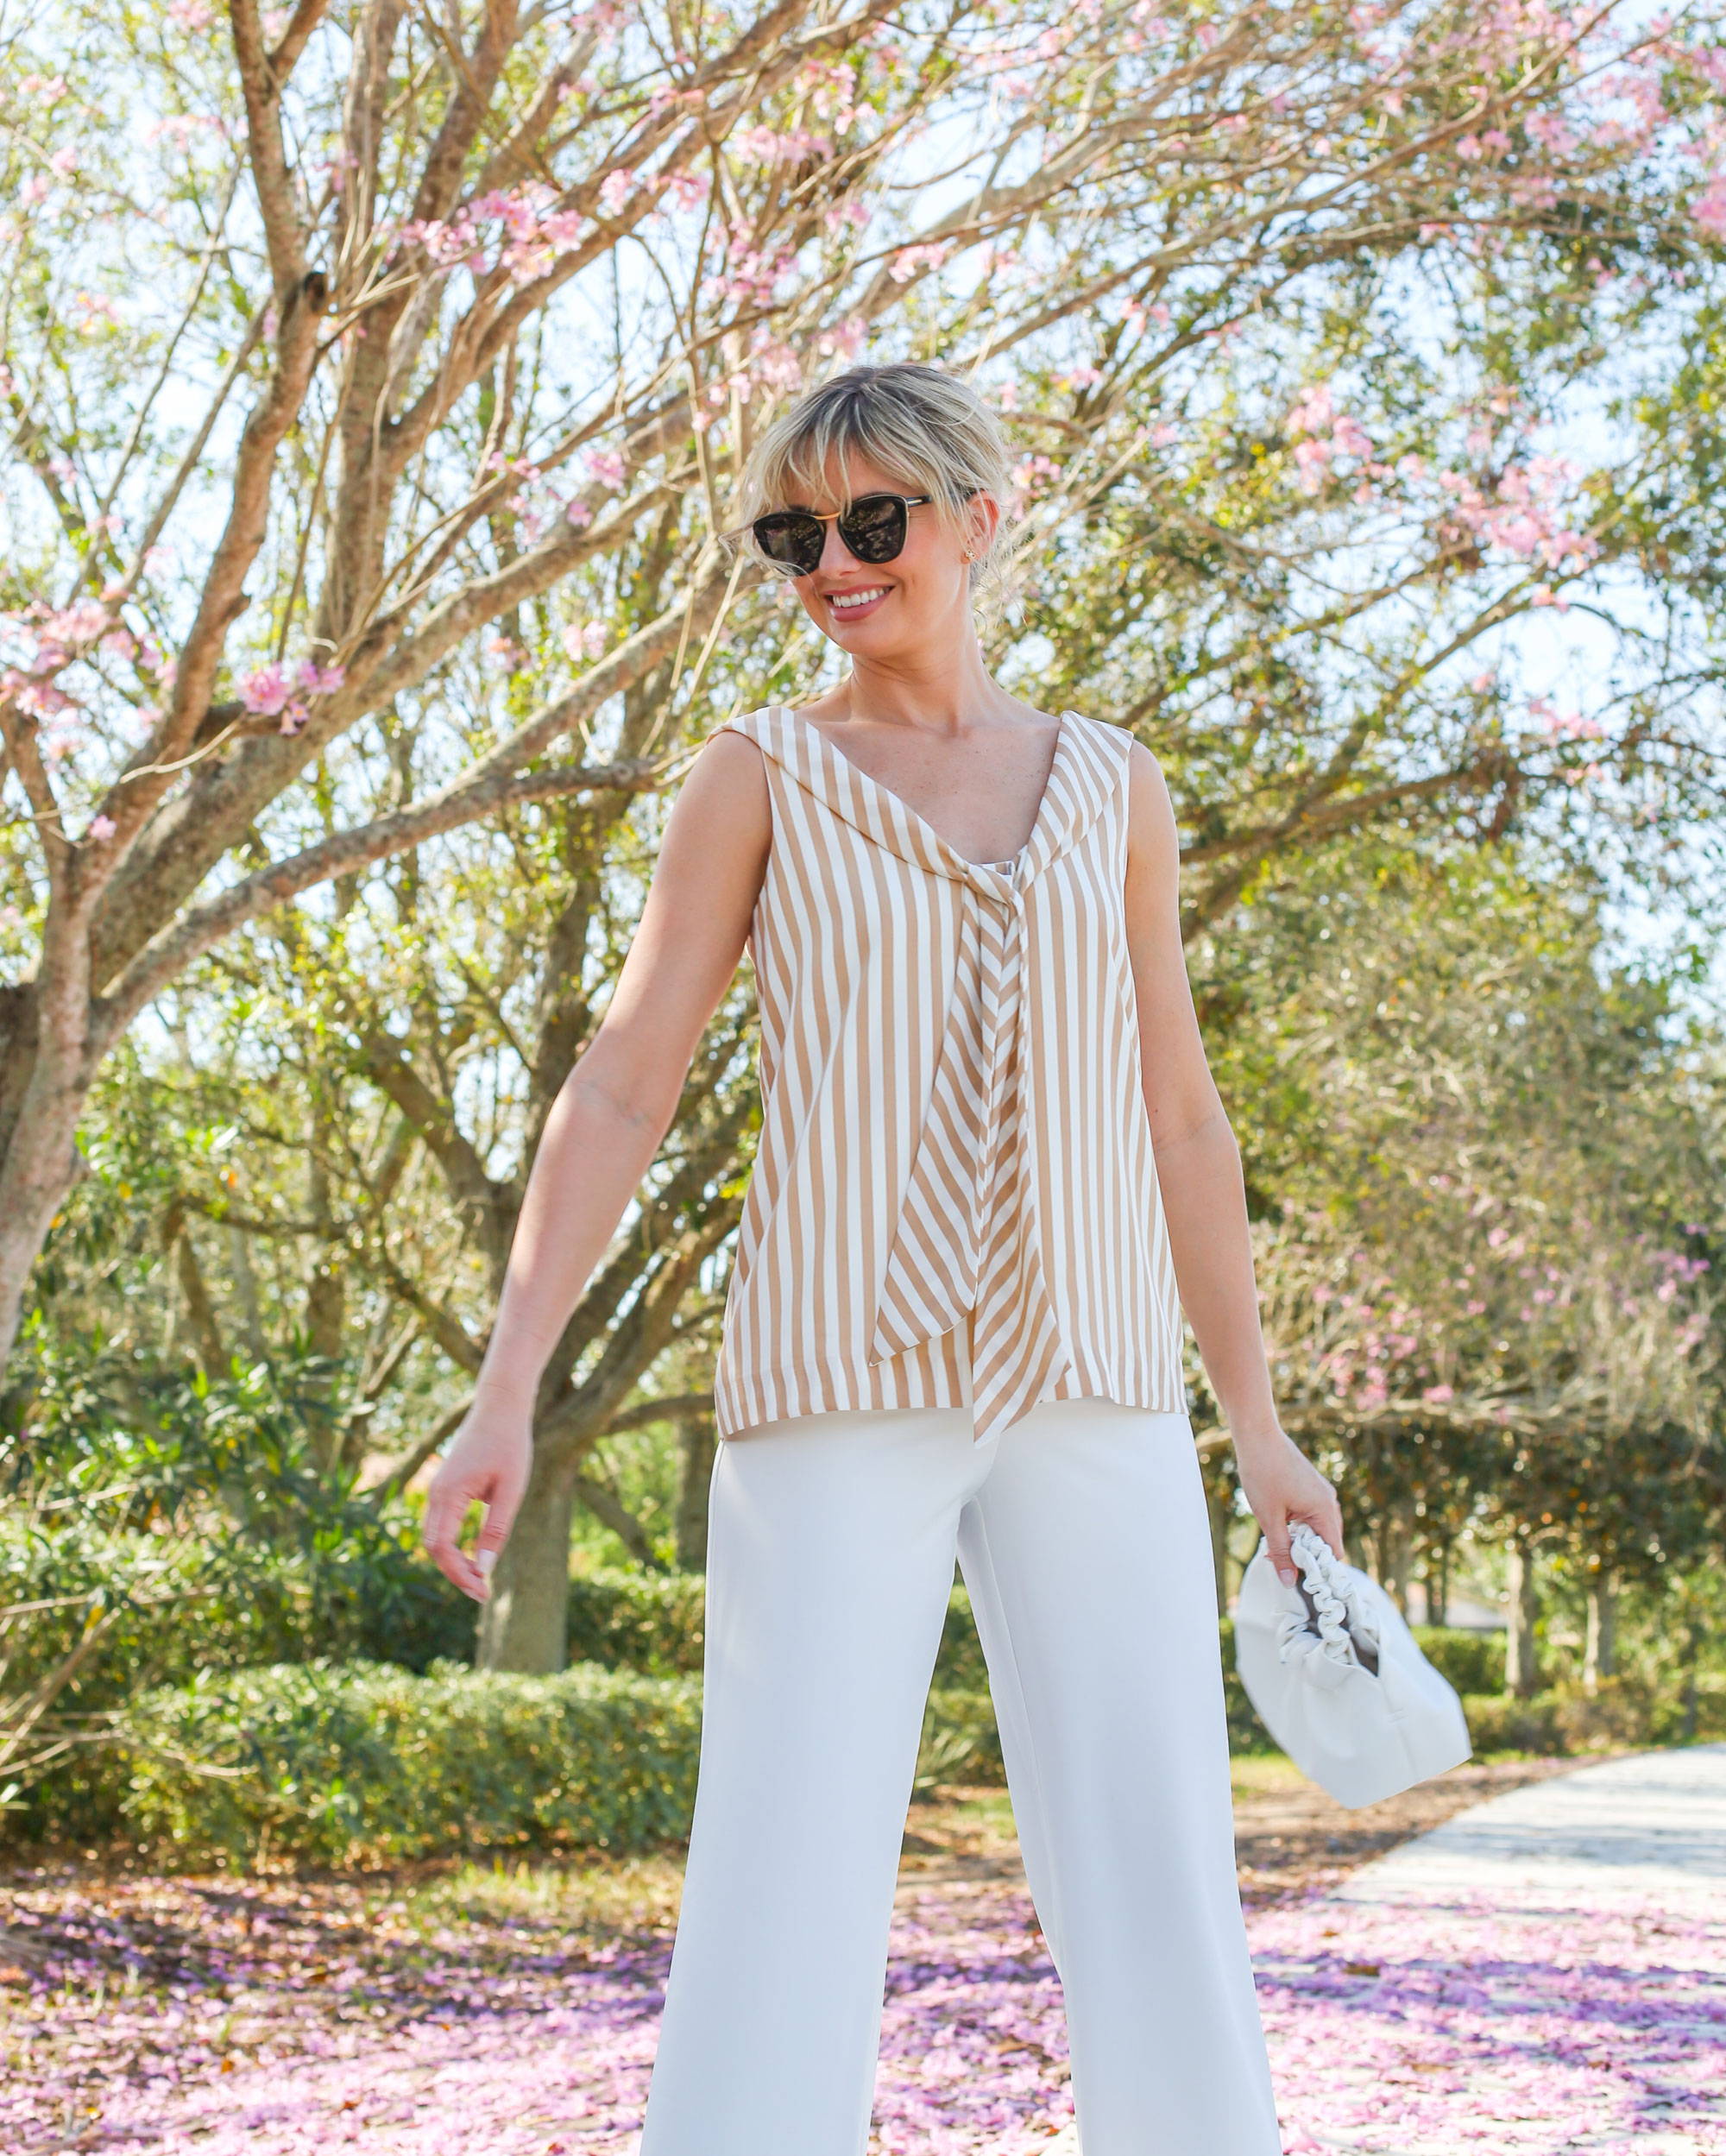 The Penelope Top – Camilyn Beth